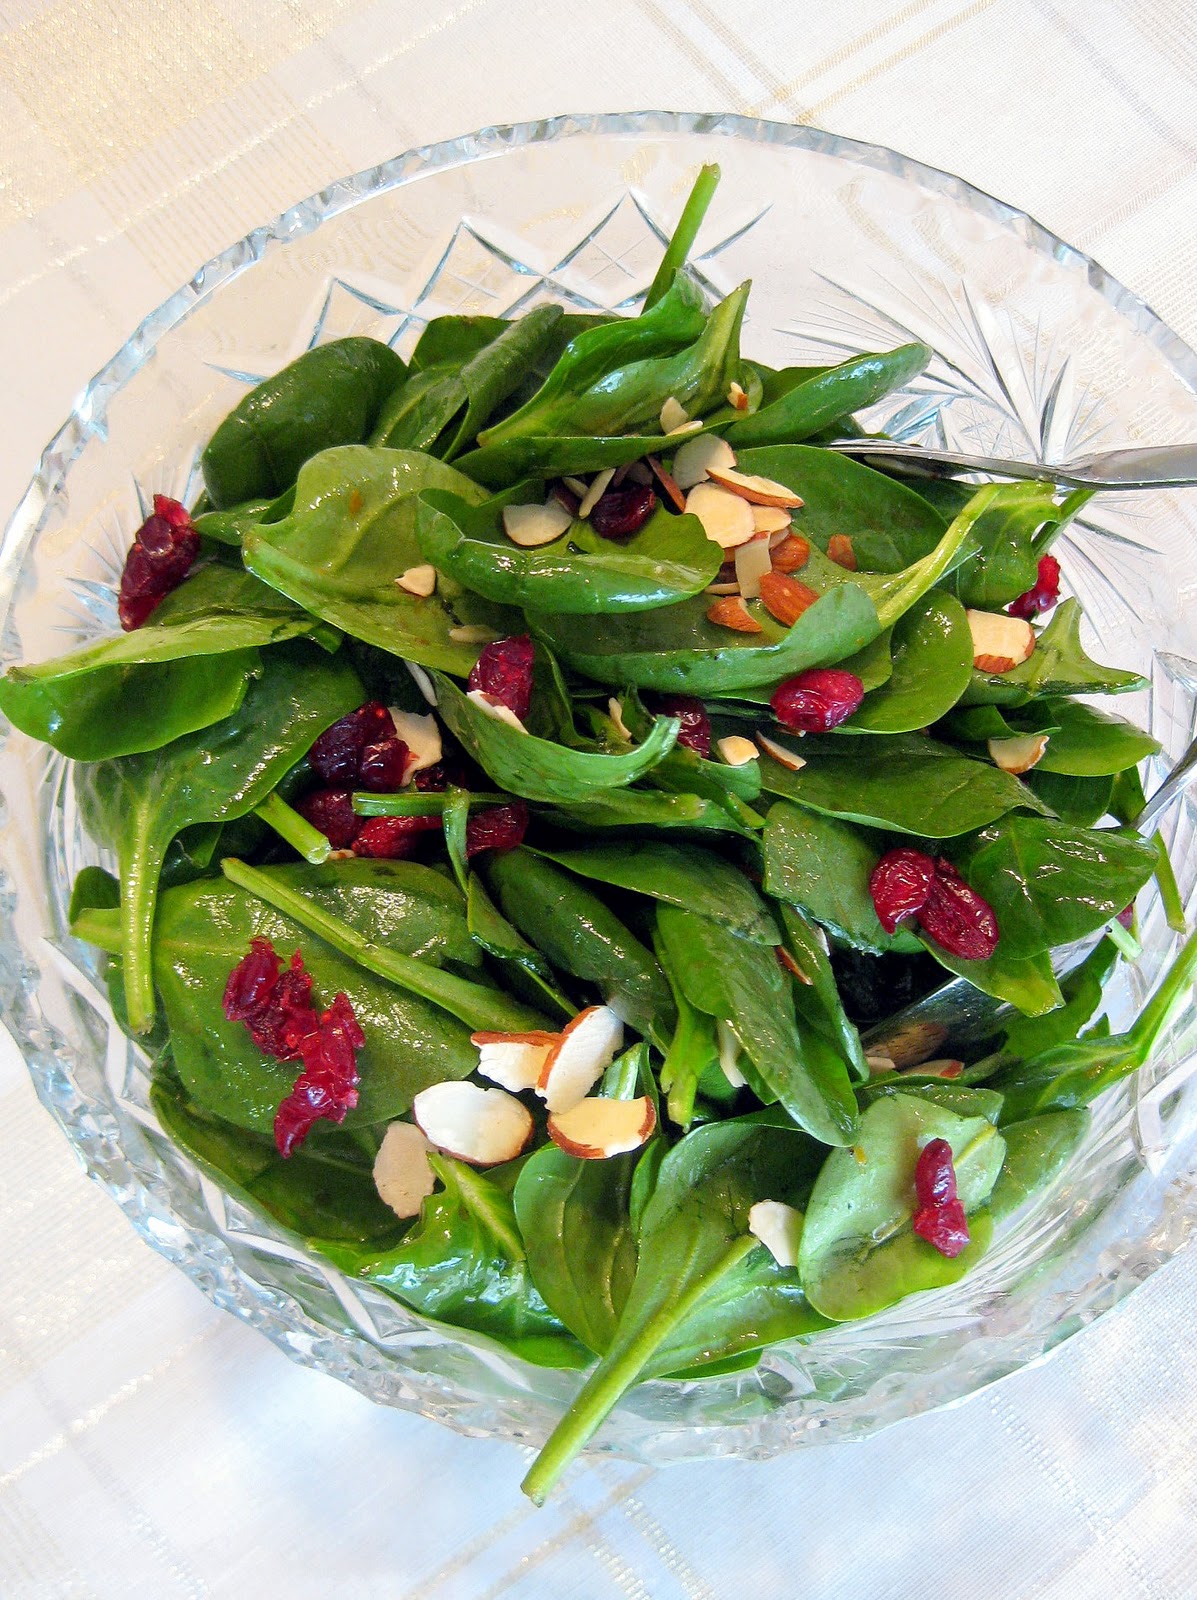 Spinach Salad with Orange Balsamic Vinaigrette | A Hint of Honey